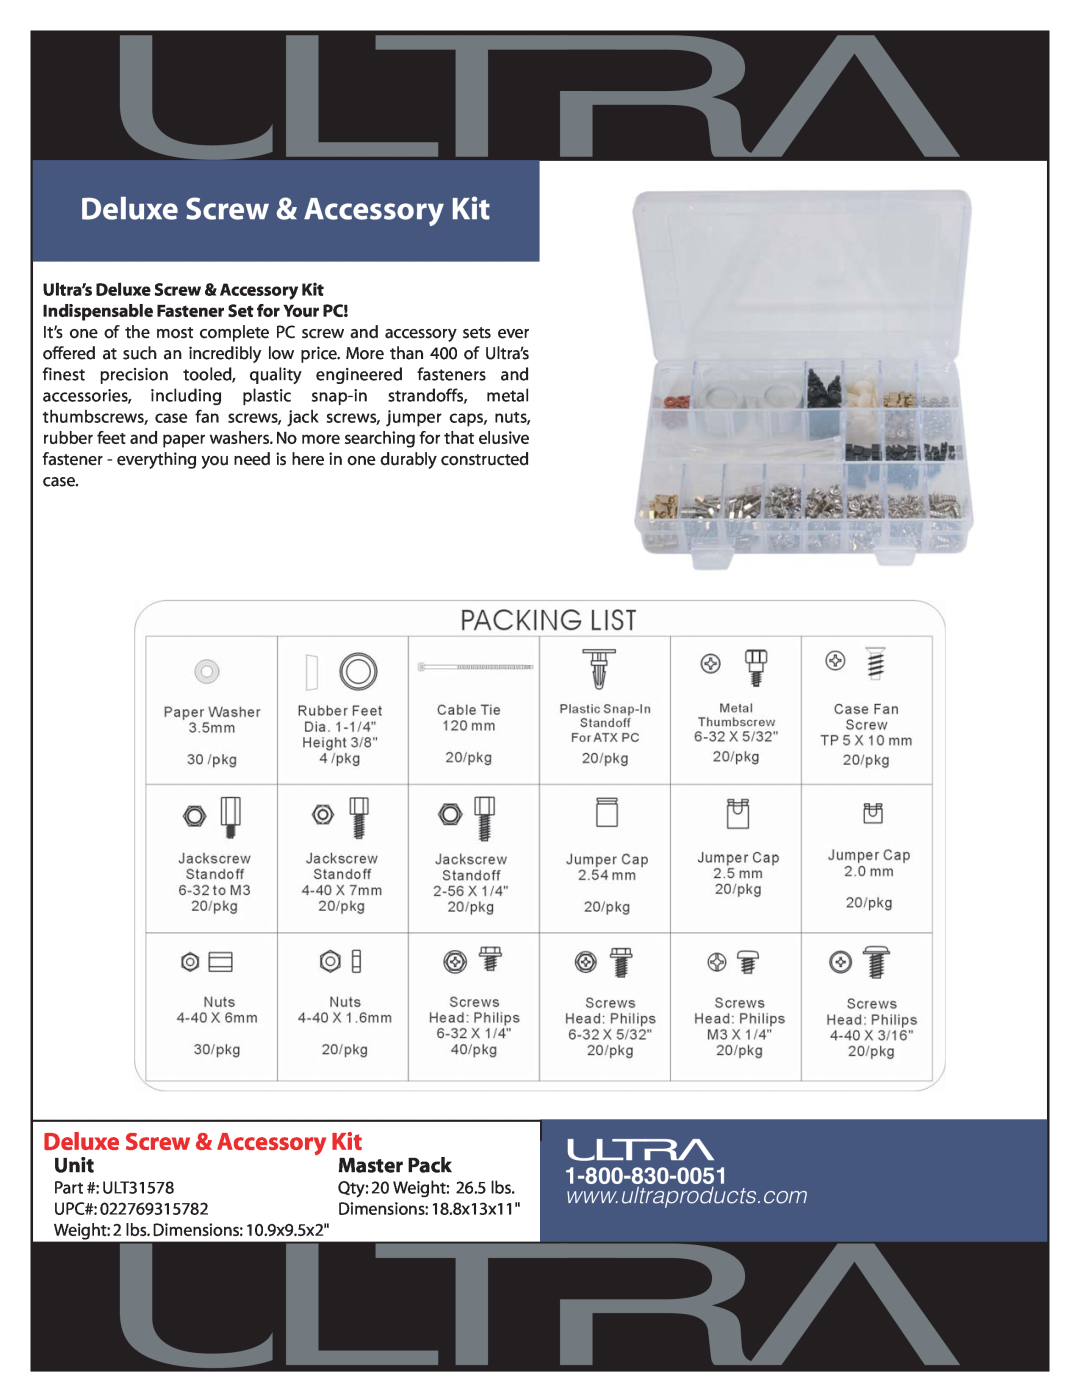 Ultra Products ULT31578 dimensions Unit, Master Pack, Ultra’s Deluxe Screw & Accessory Kit 